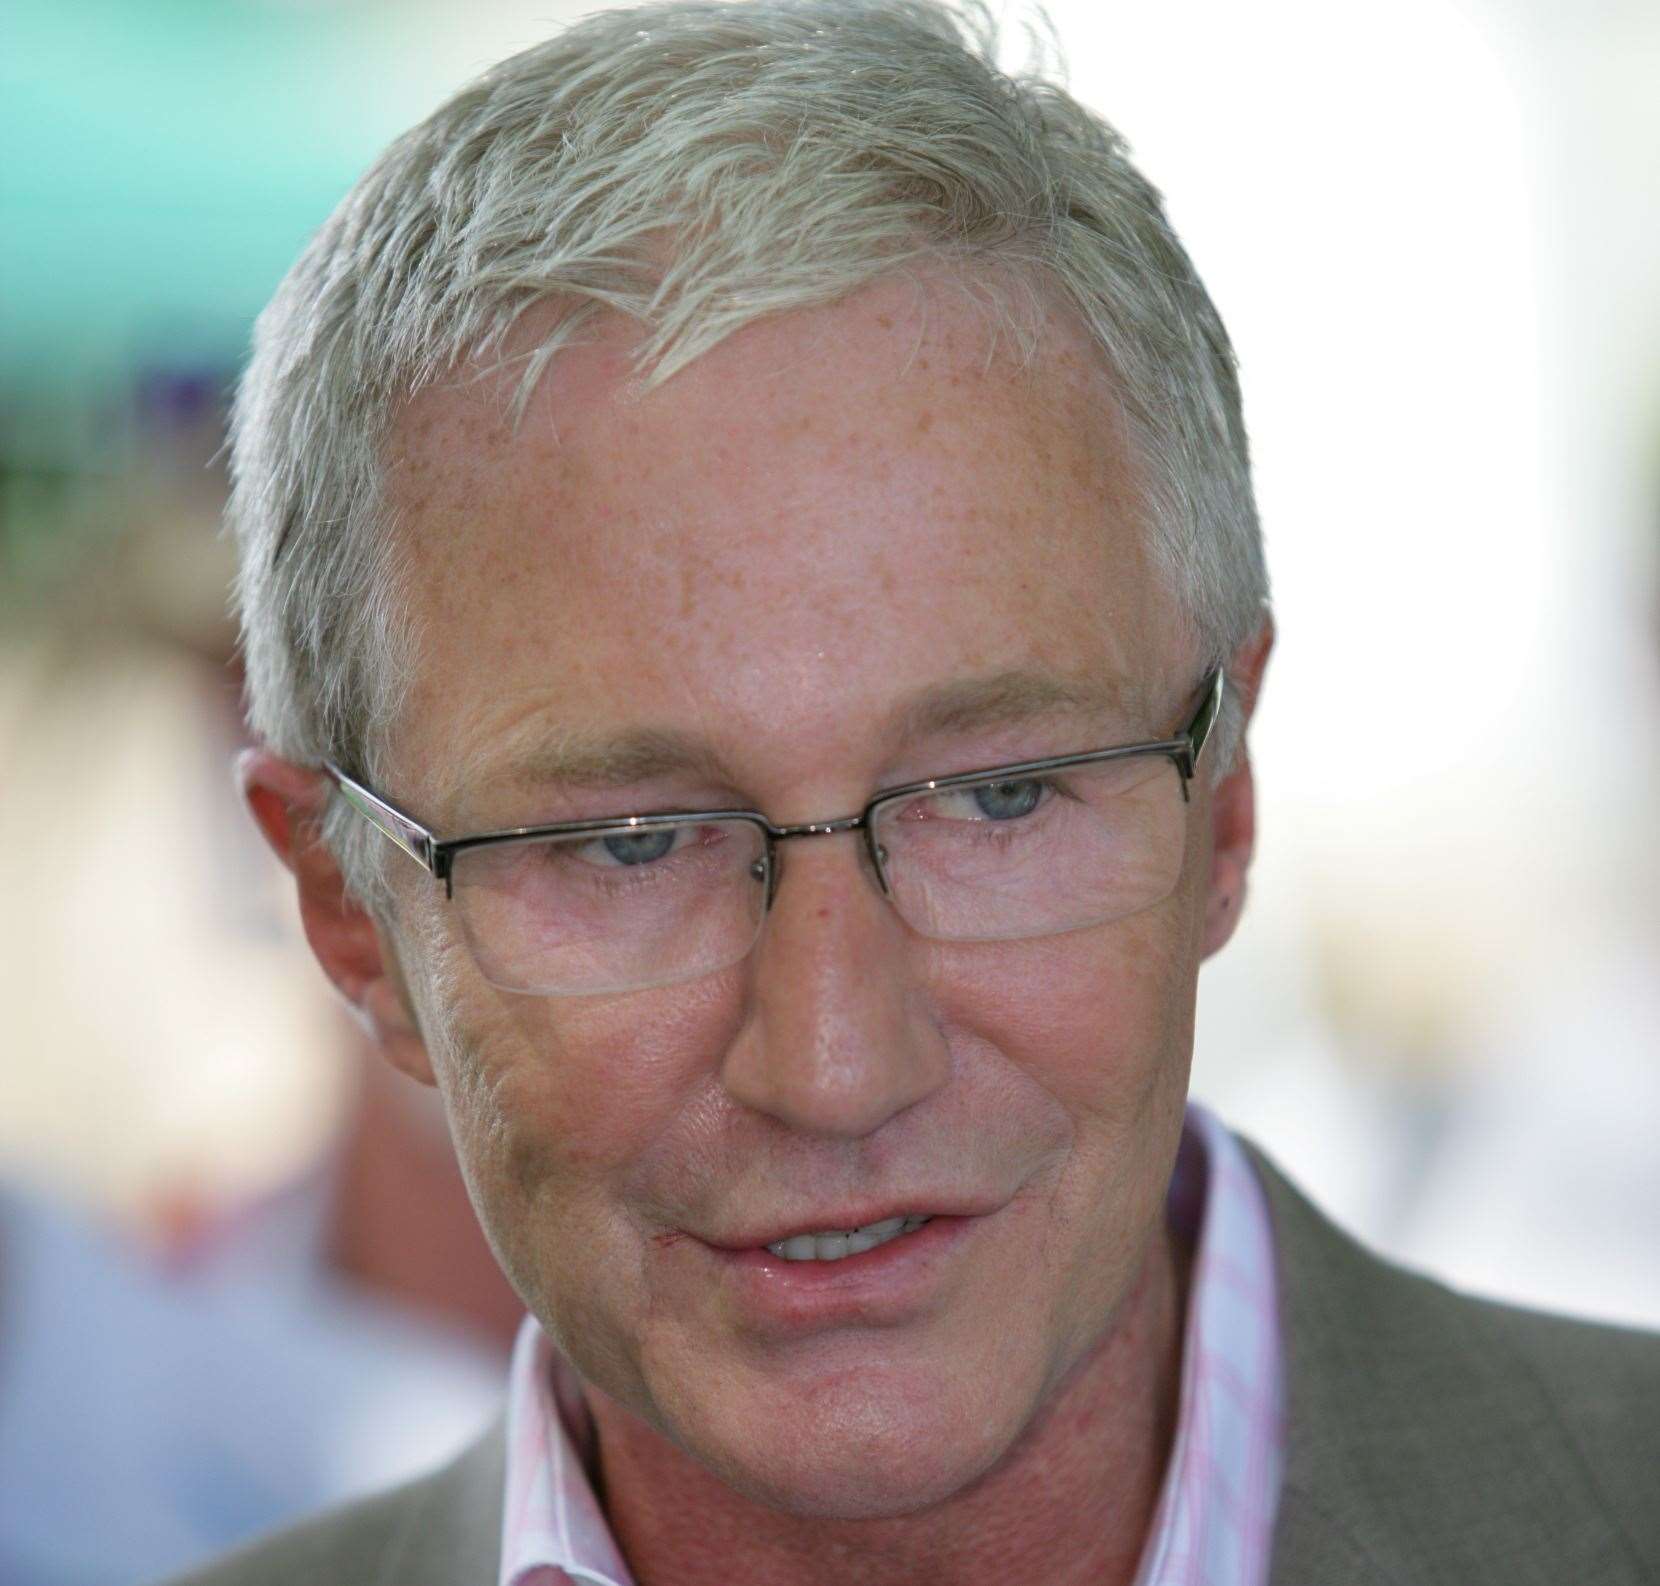 Paul O'Grady says the scheduling shake-up was "nothing to do with me"